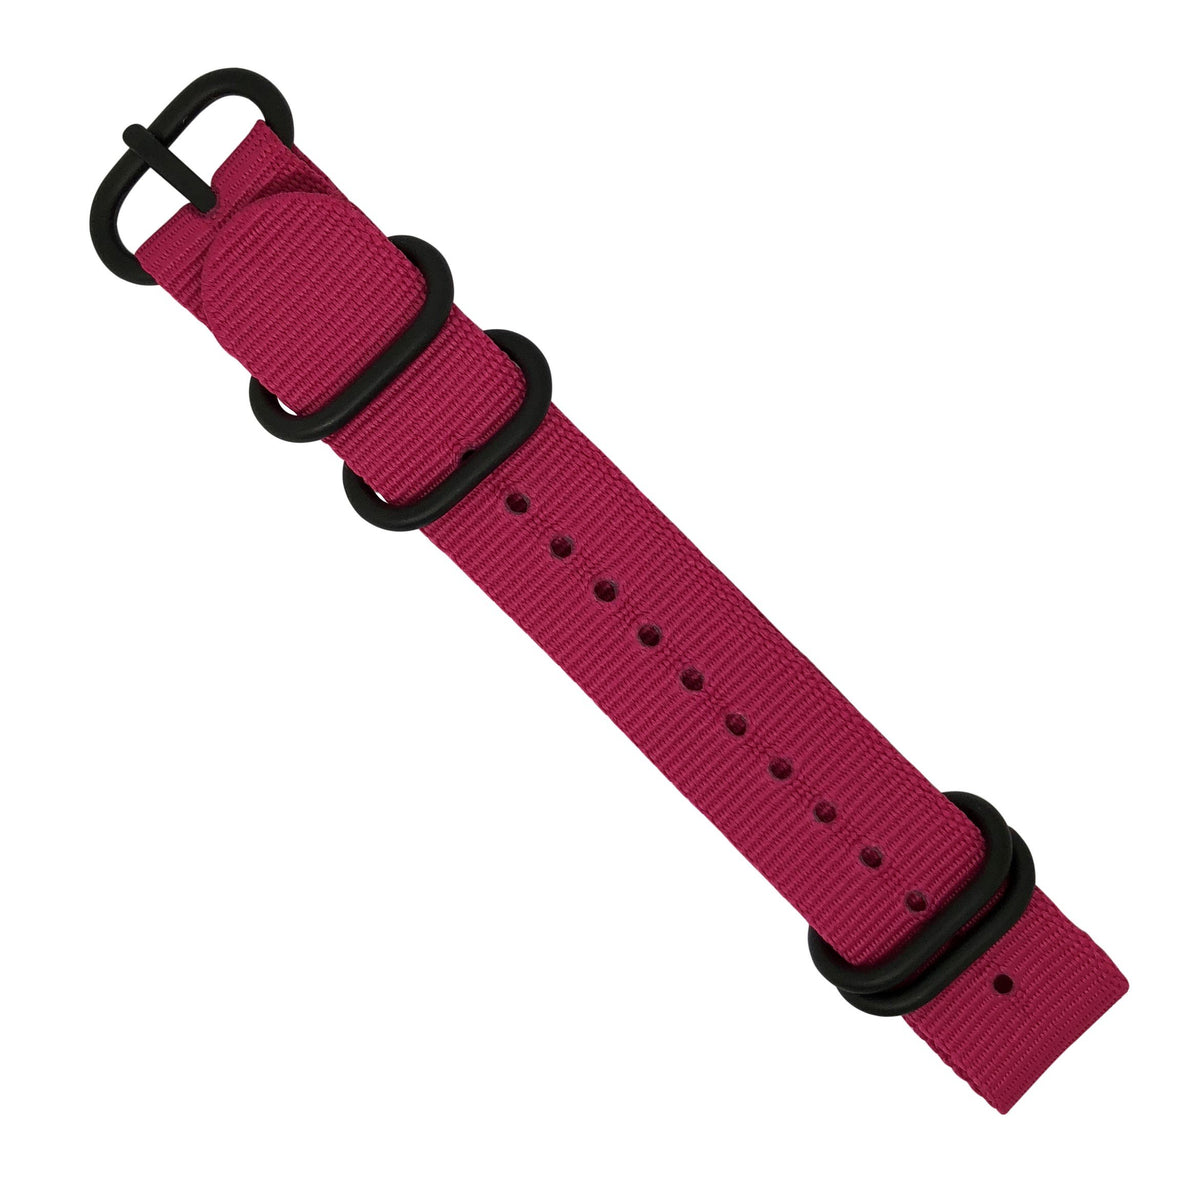 Nylon Zulu Strap in Pink with Black Buckle (18mm) - Nomad Watch Works Malaysia